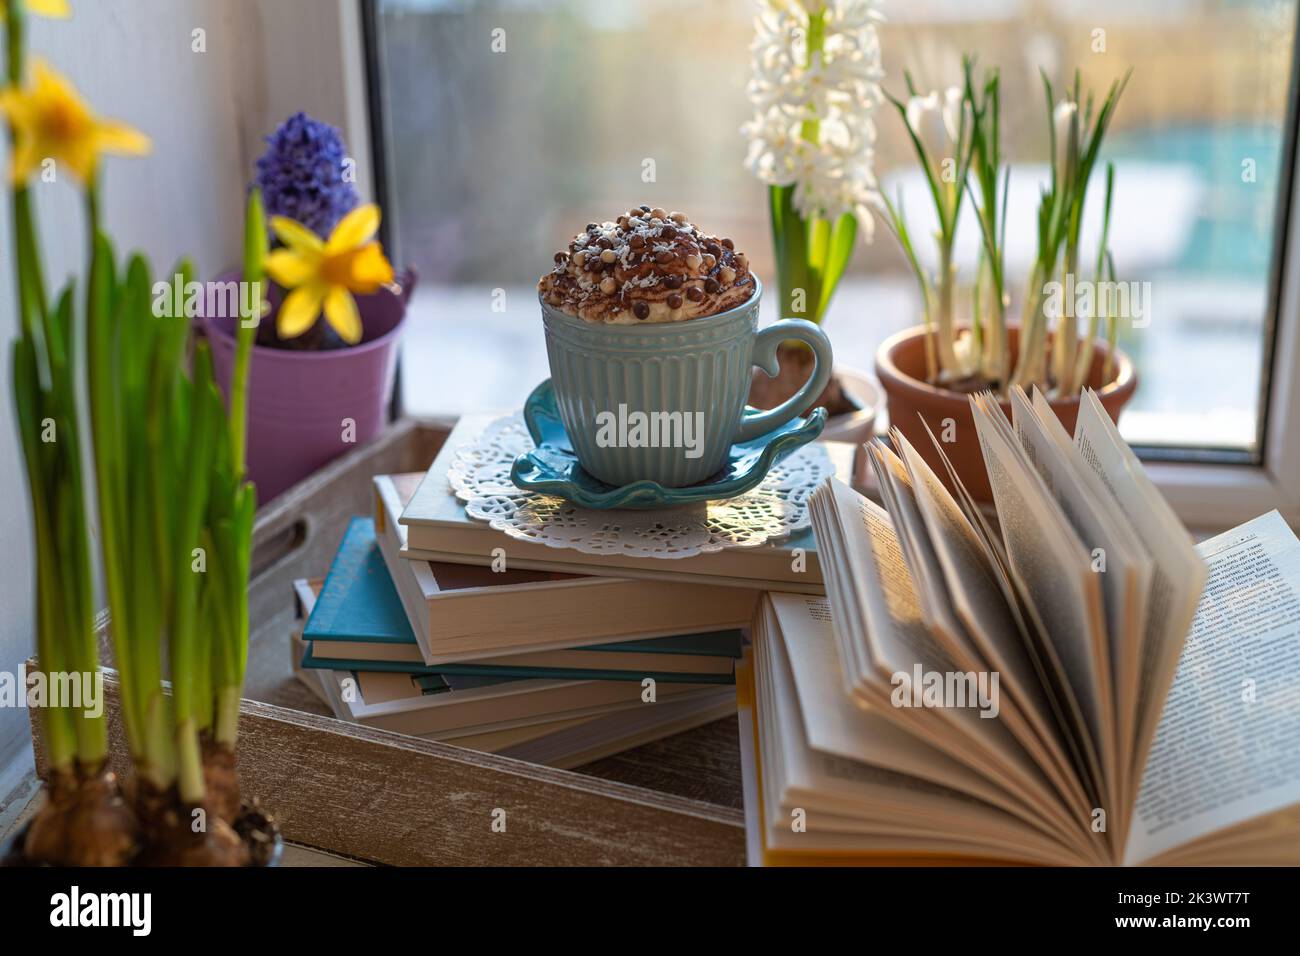 Coffee cup with whipped cream, flowers and open books on a window sill. Concept warm and cozy home interior Stock Photo